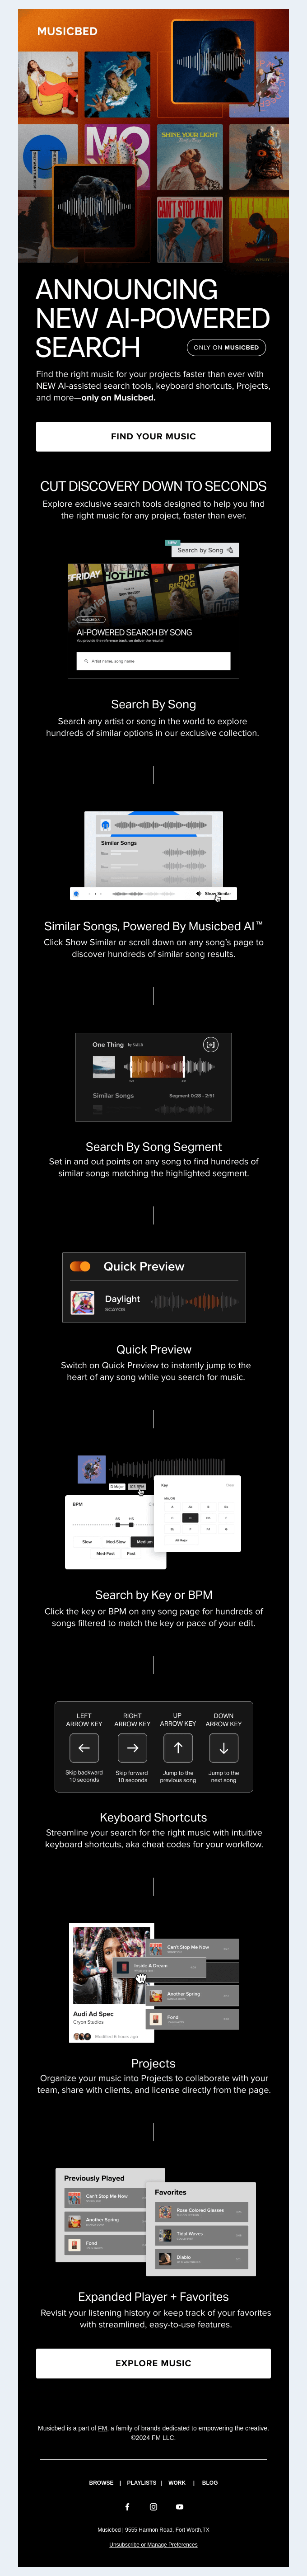 Our NEW AI-powered song search tool will save you SO much time